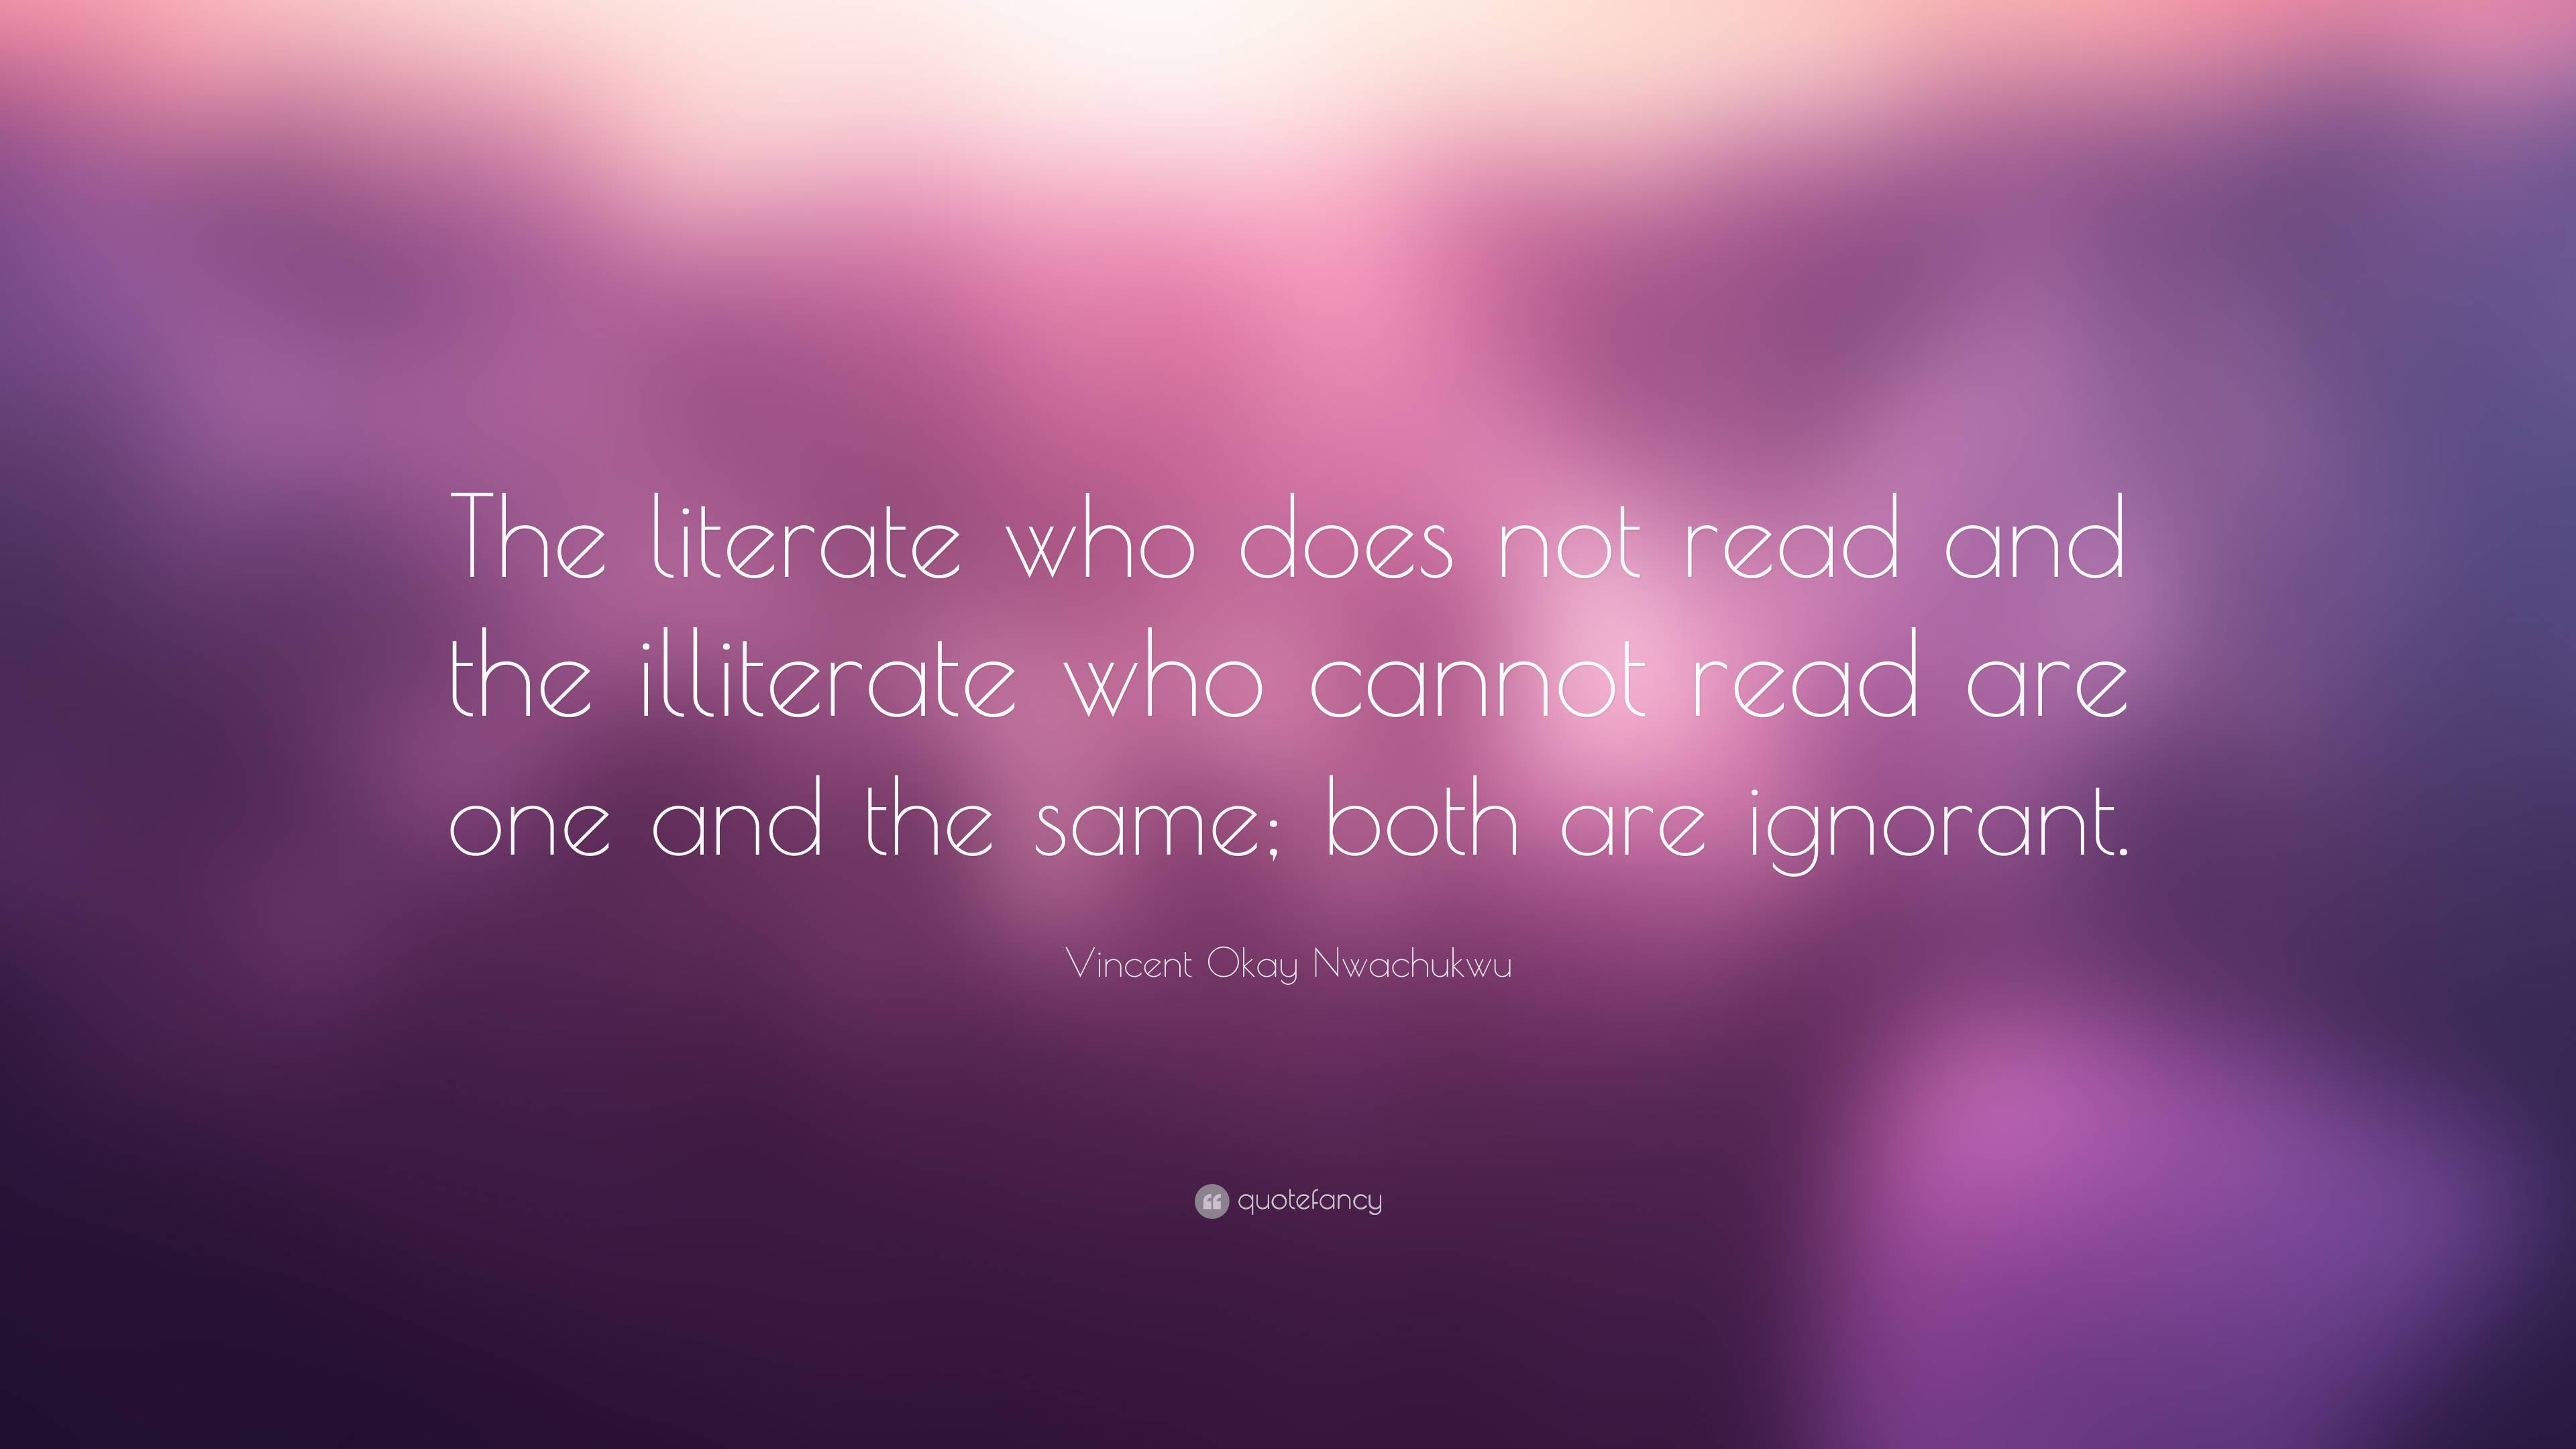 Vincent Okay Nwachukwu Quote: “The literate who does not read and the ...